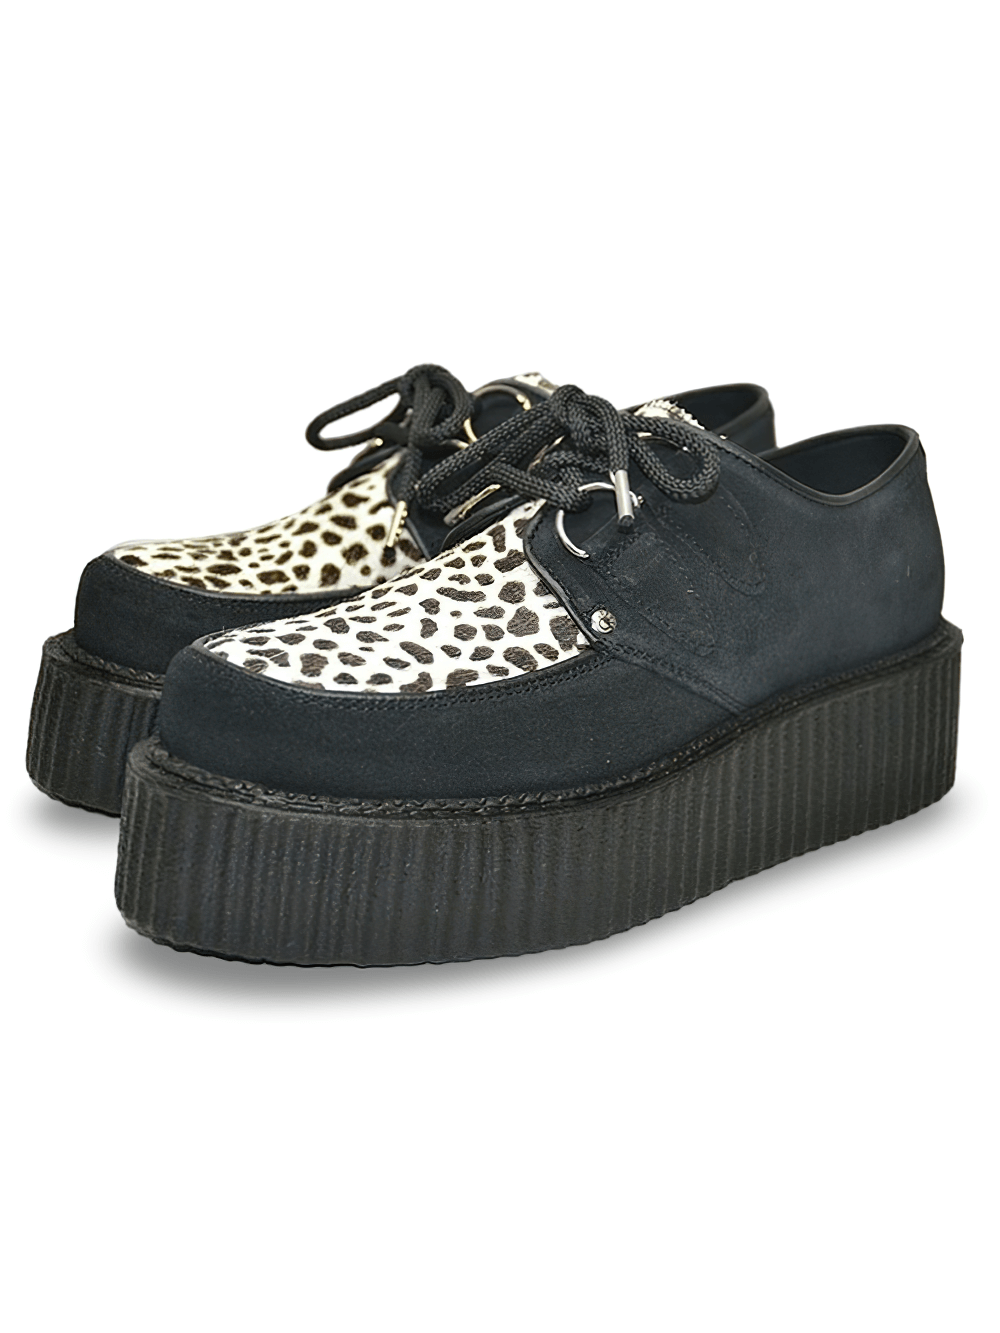 Unisex Suede and Fur Creepers With Double Sole